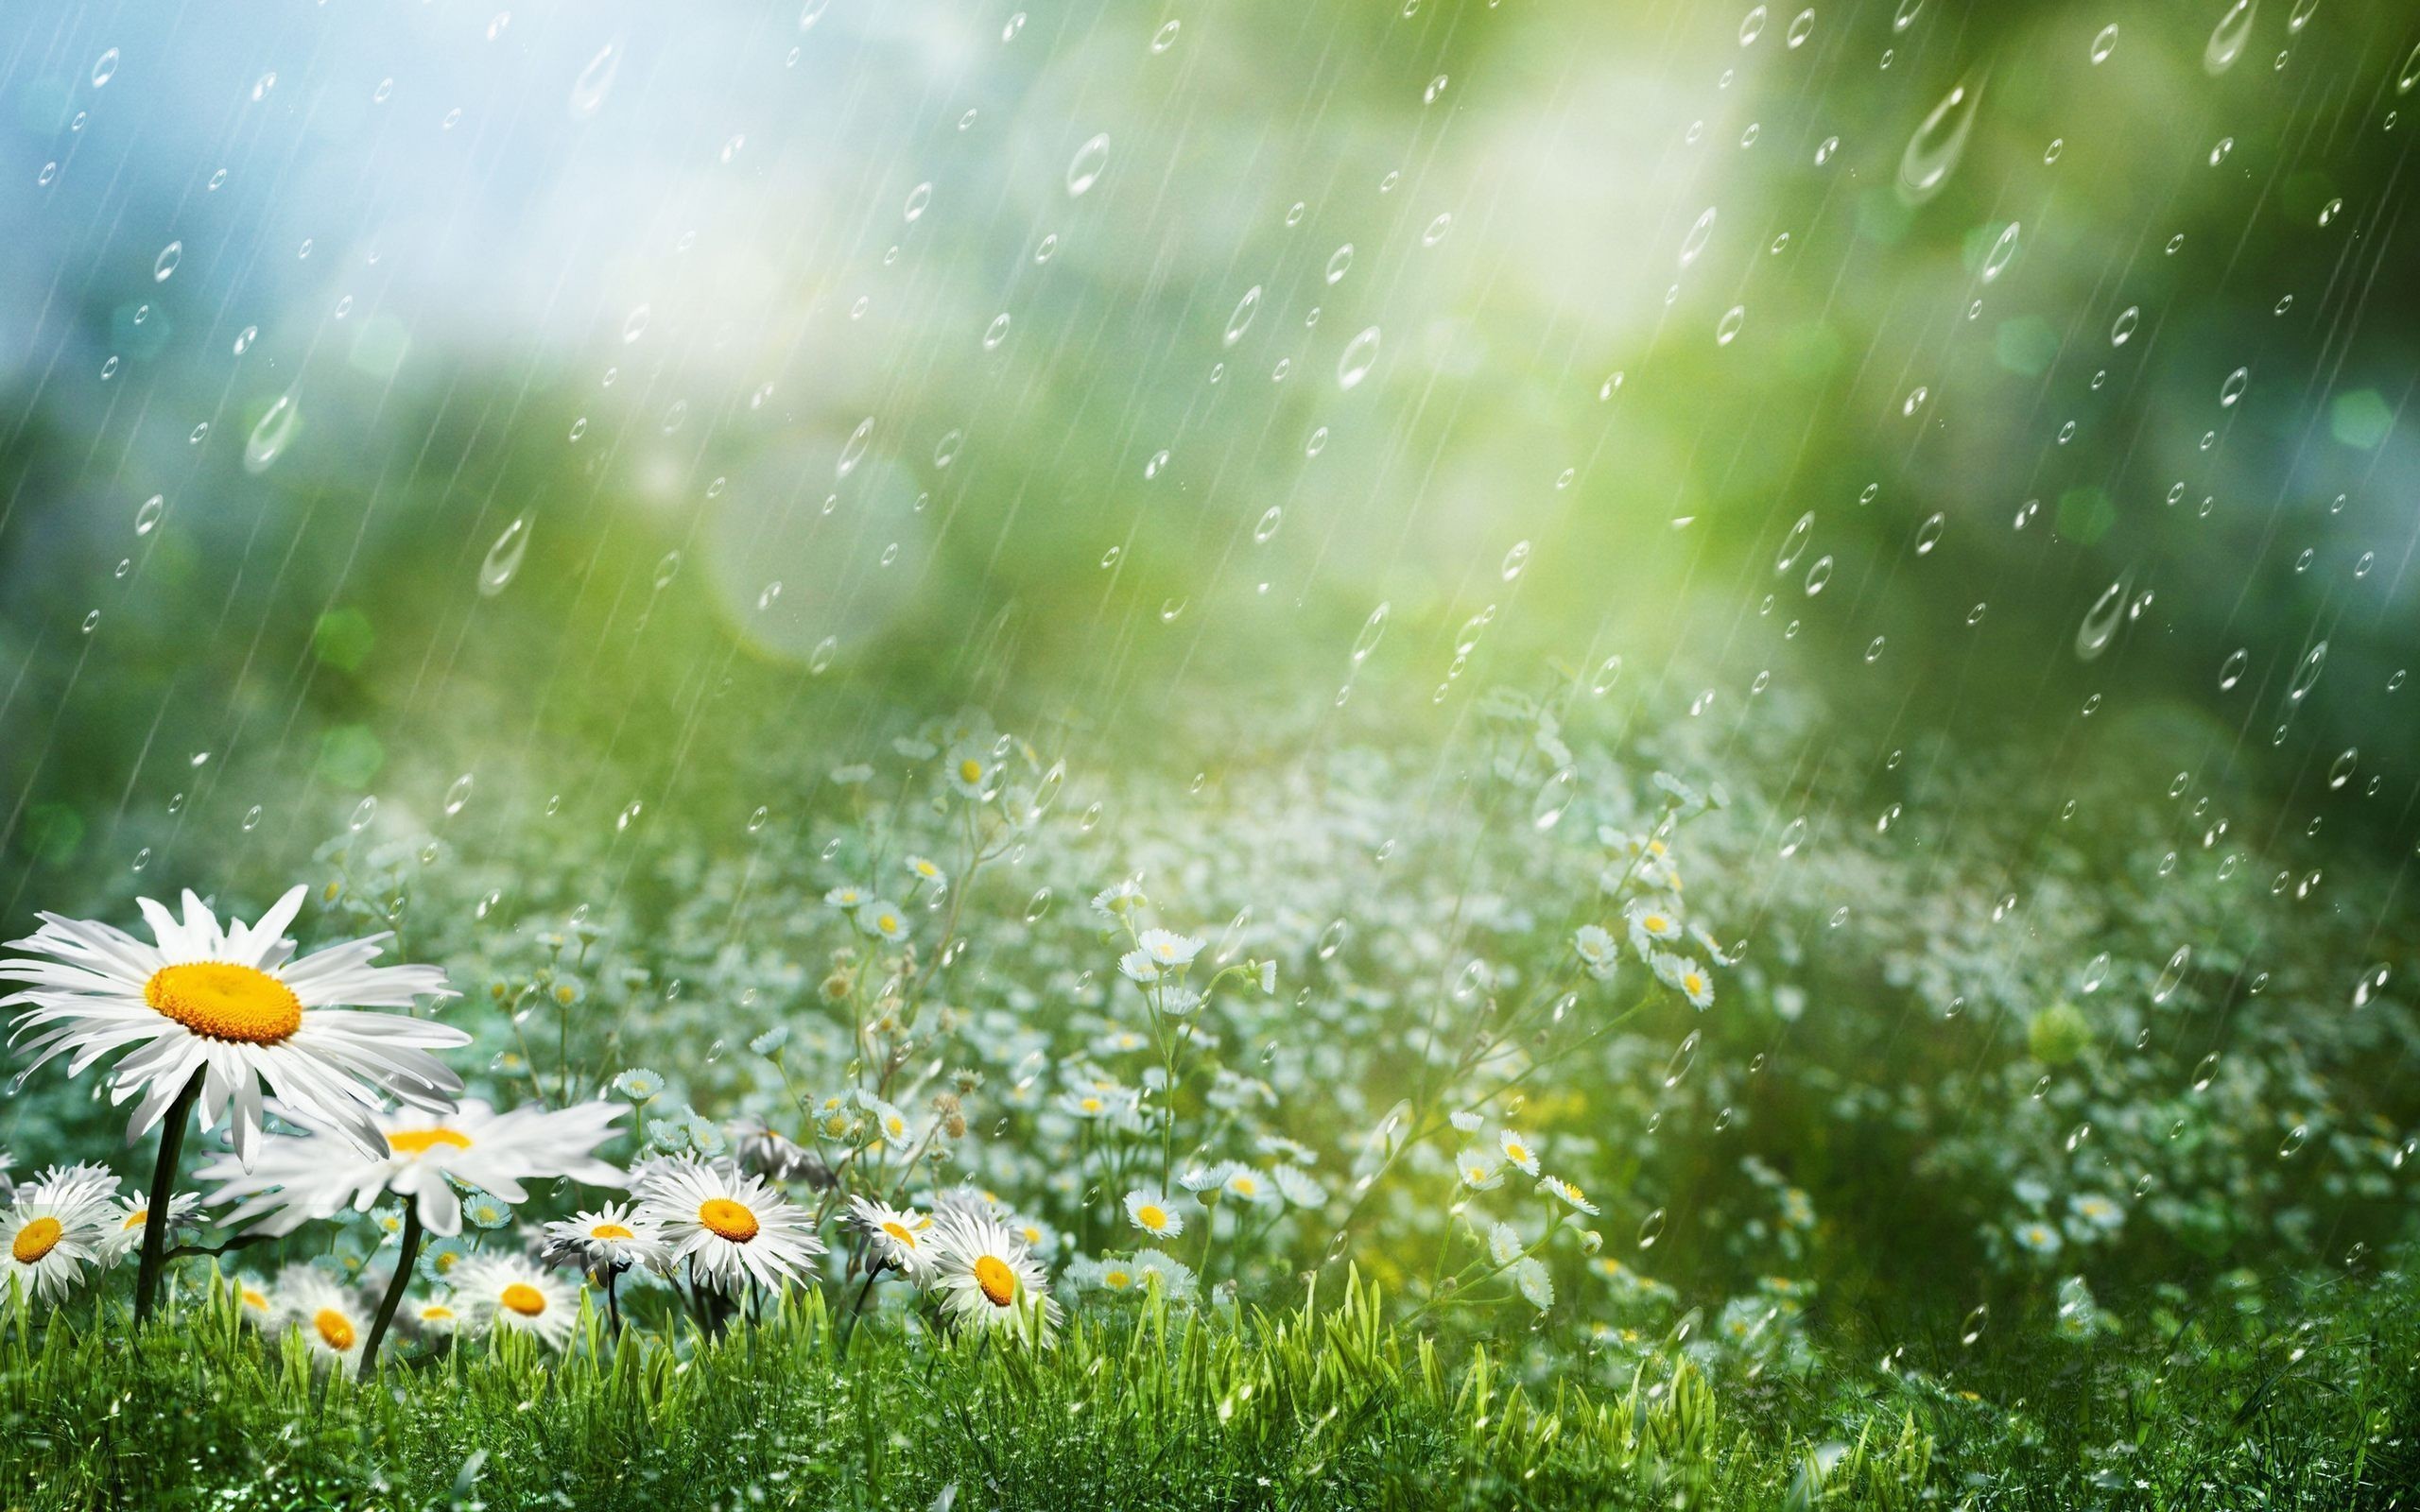 rainy good morning wallpapers,people in nature,nature,natural landscape,daisy,green